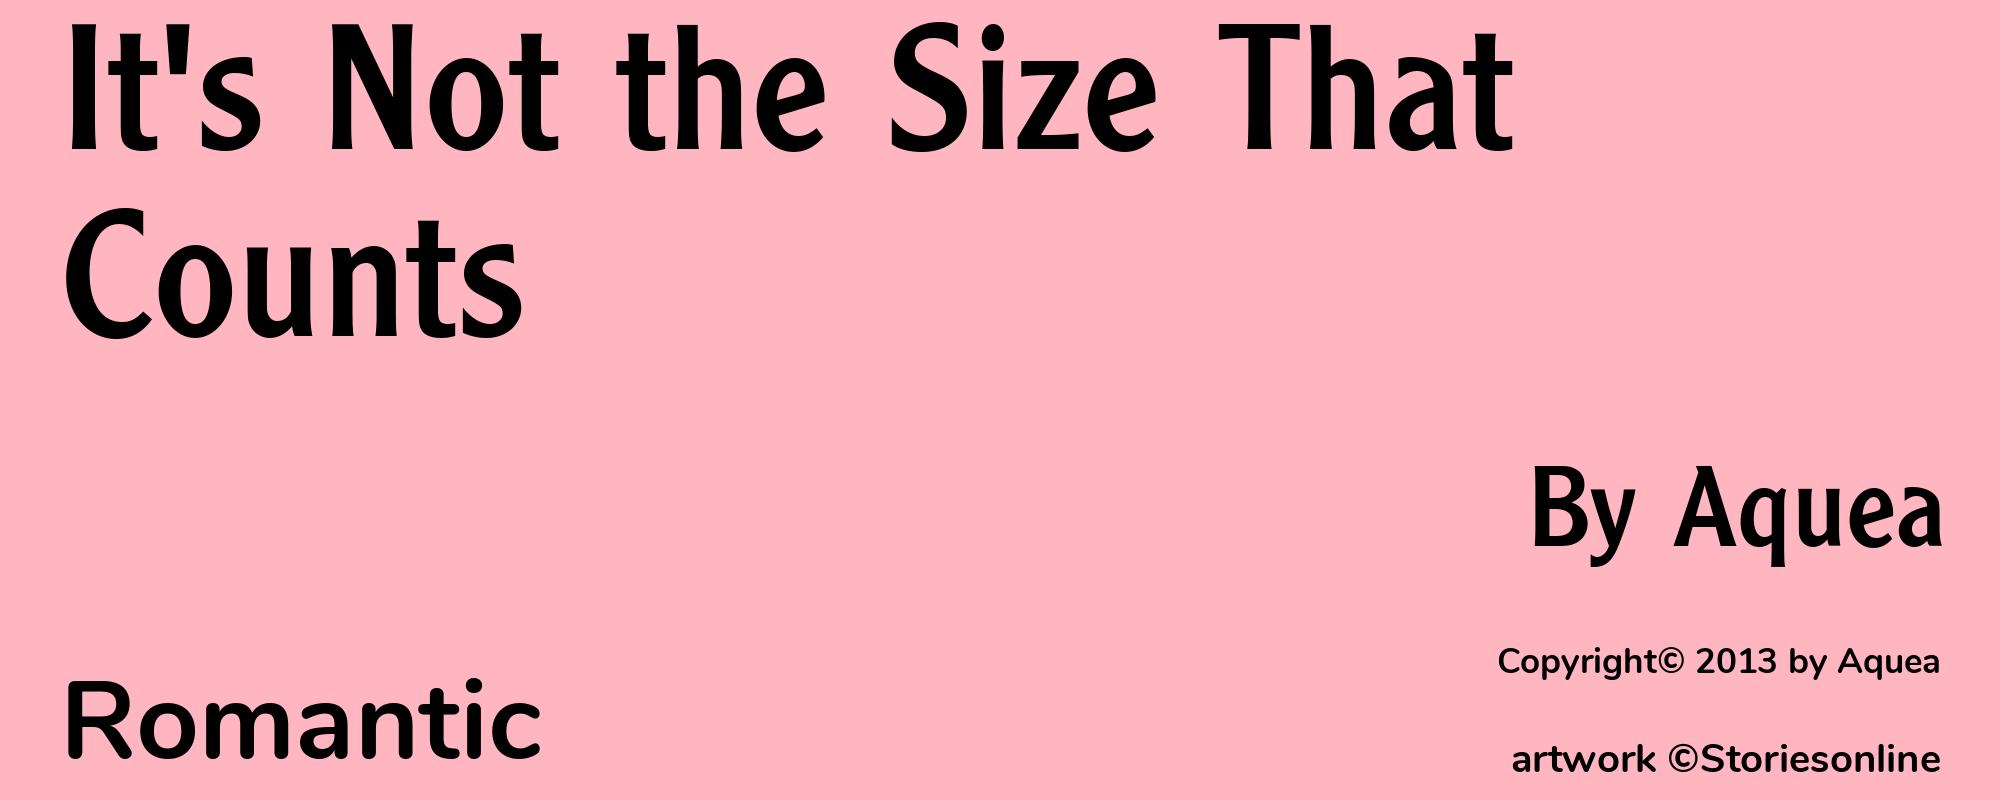 It's Not the Size That Counts - Cover